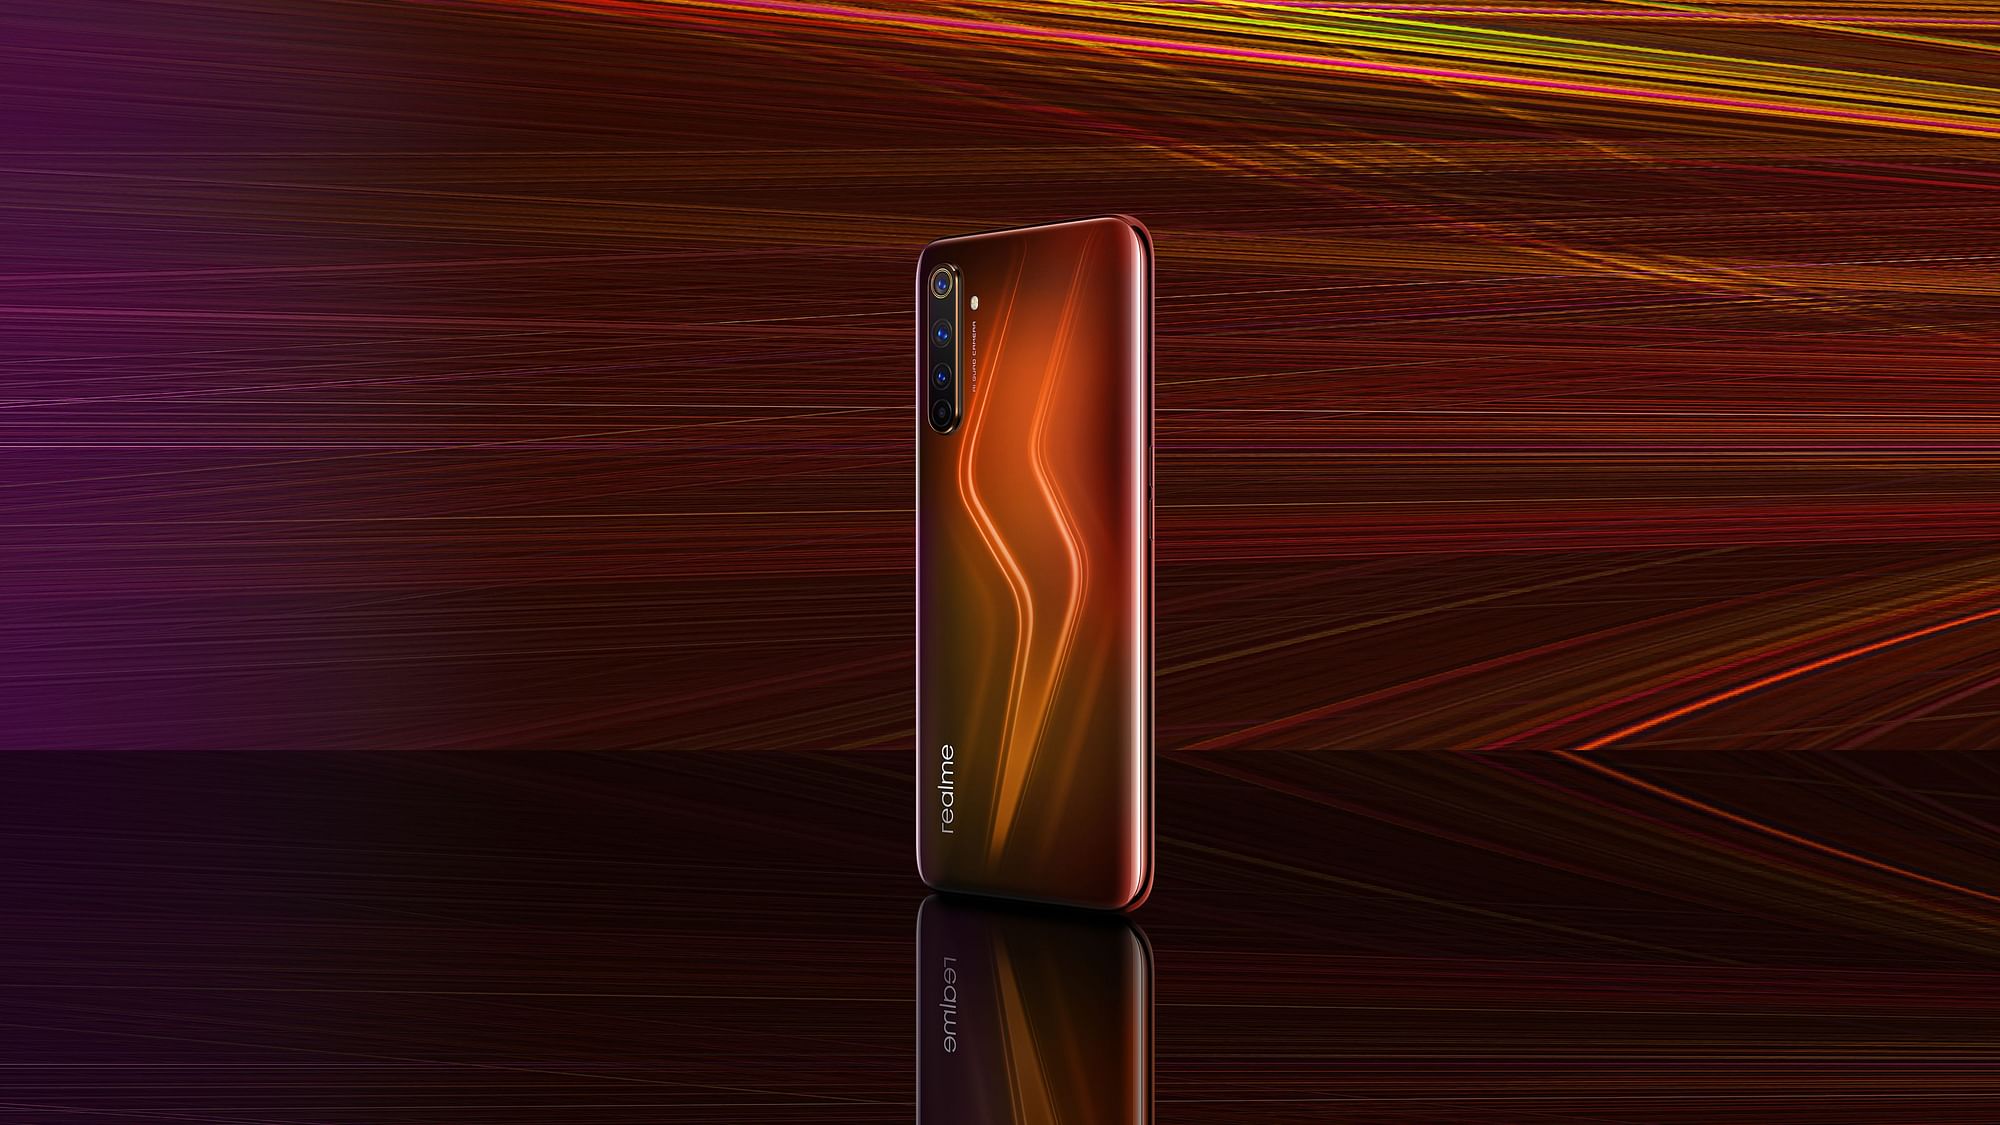 Realme 6 Pro competes with the Redmi Note series.